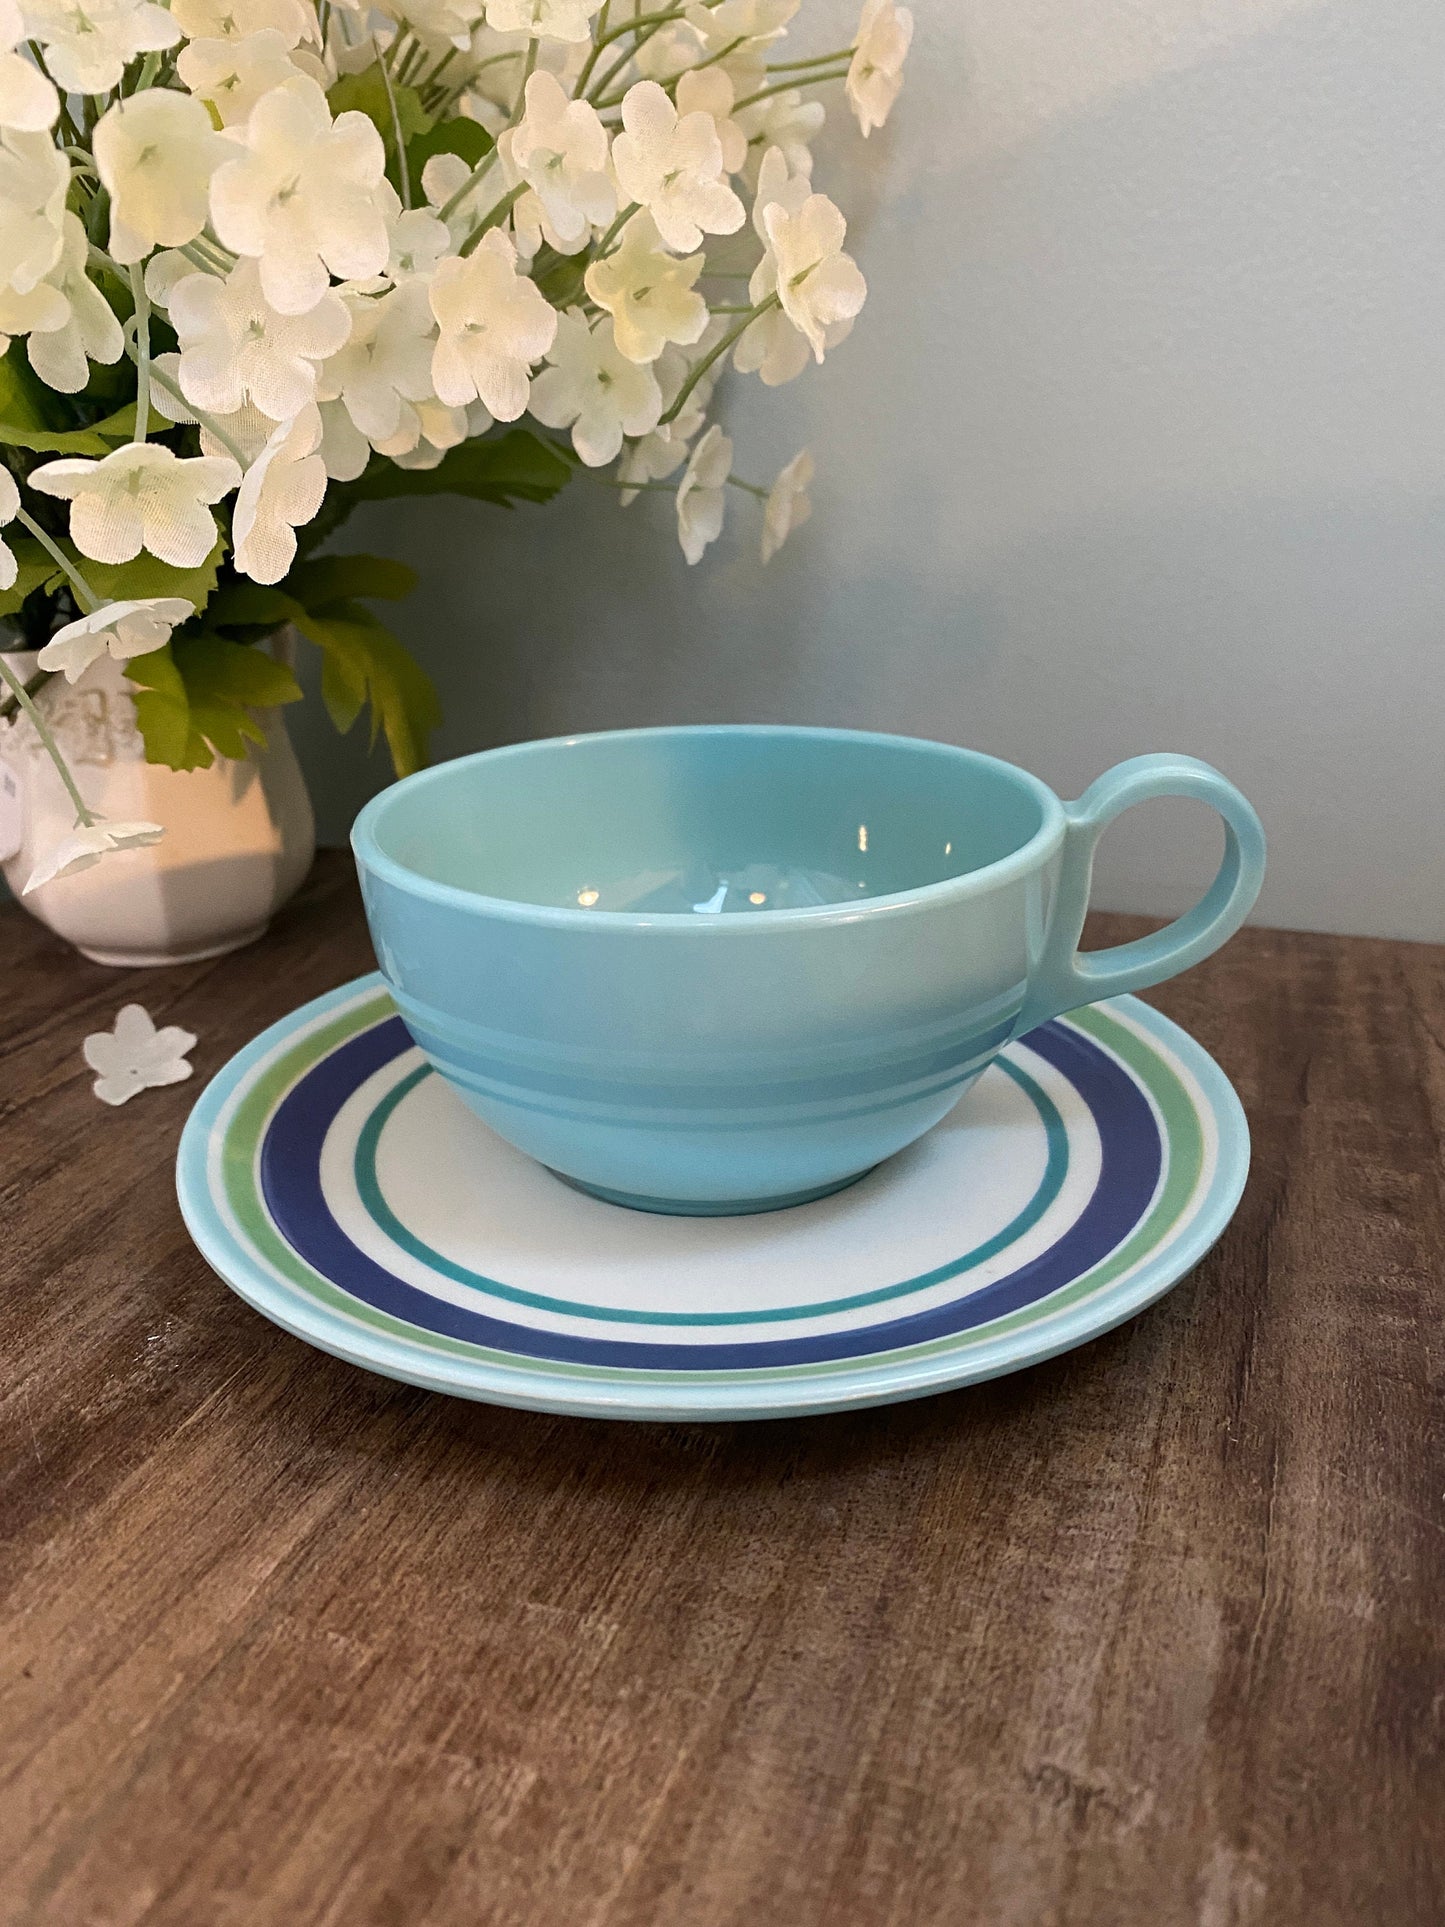 Midcentury Melamine Cup and Saucer Set